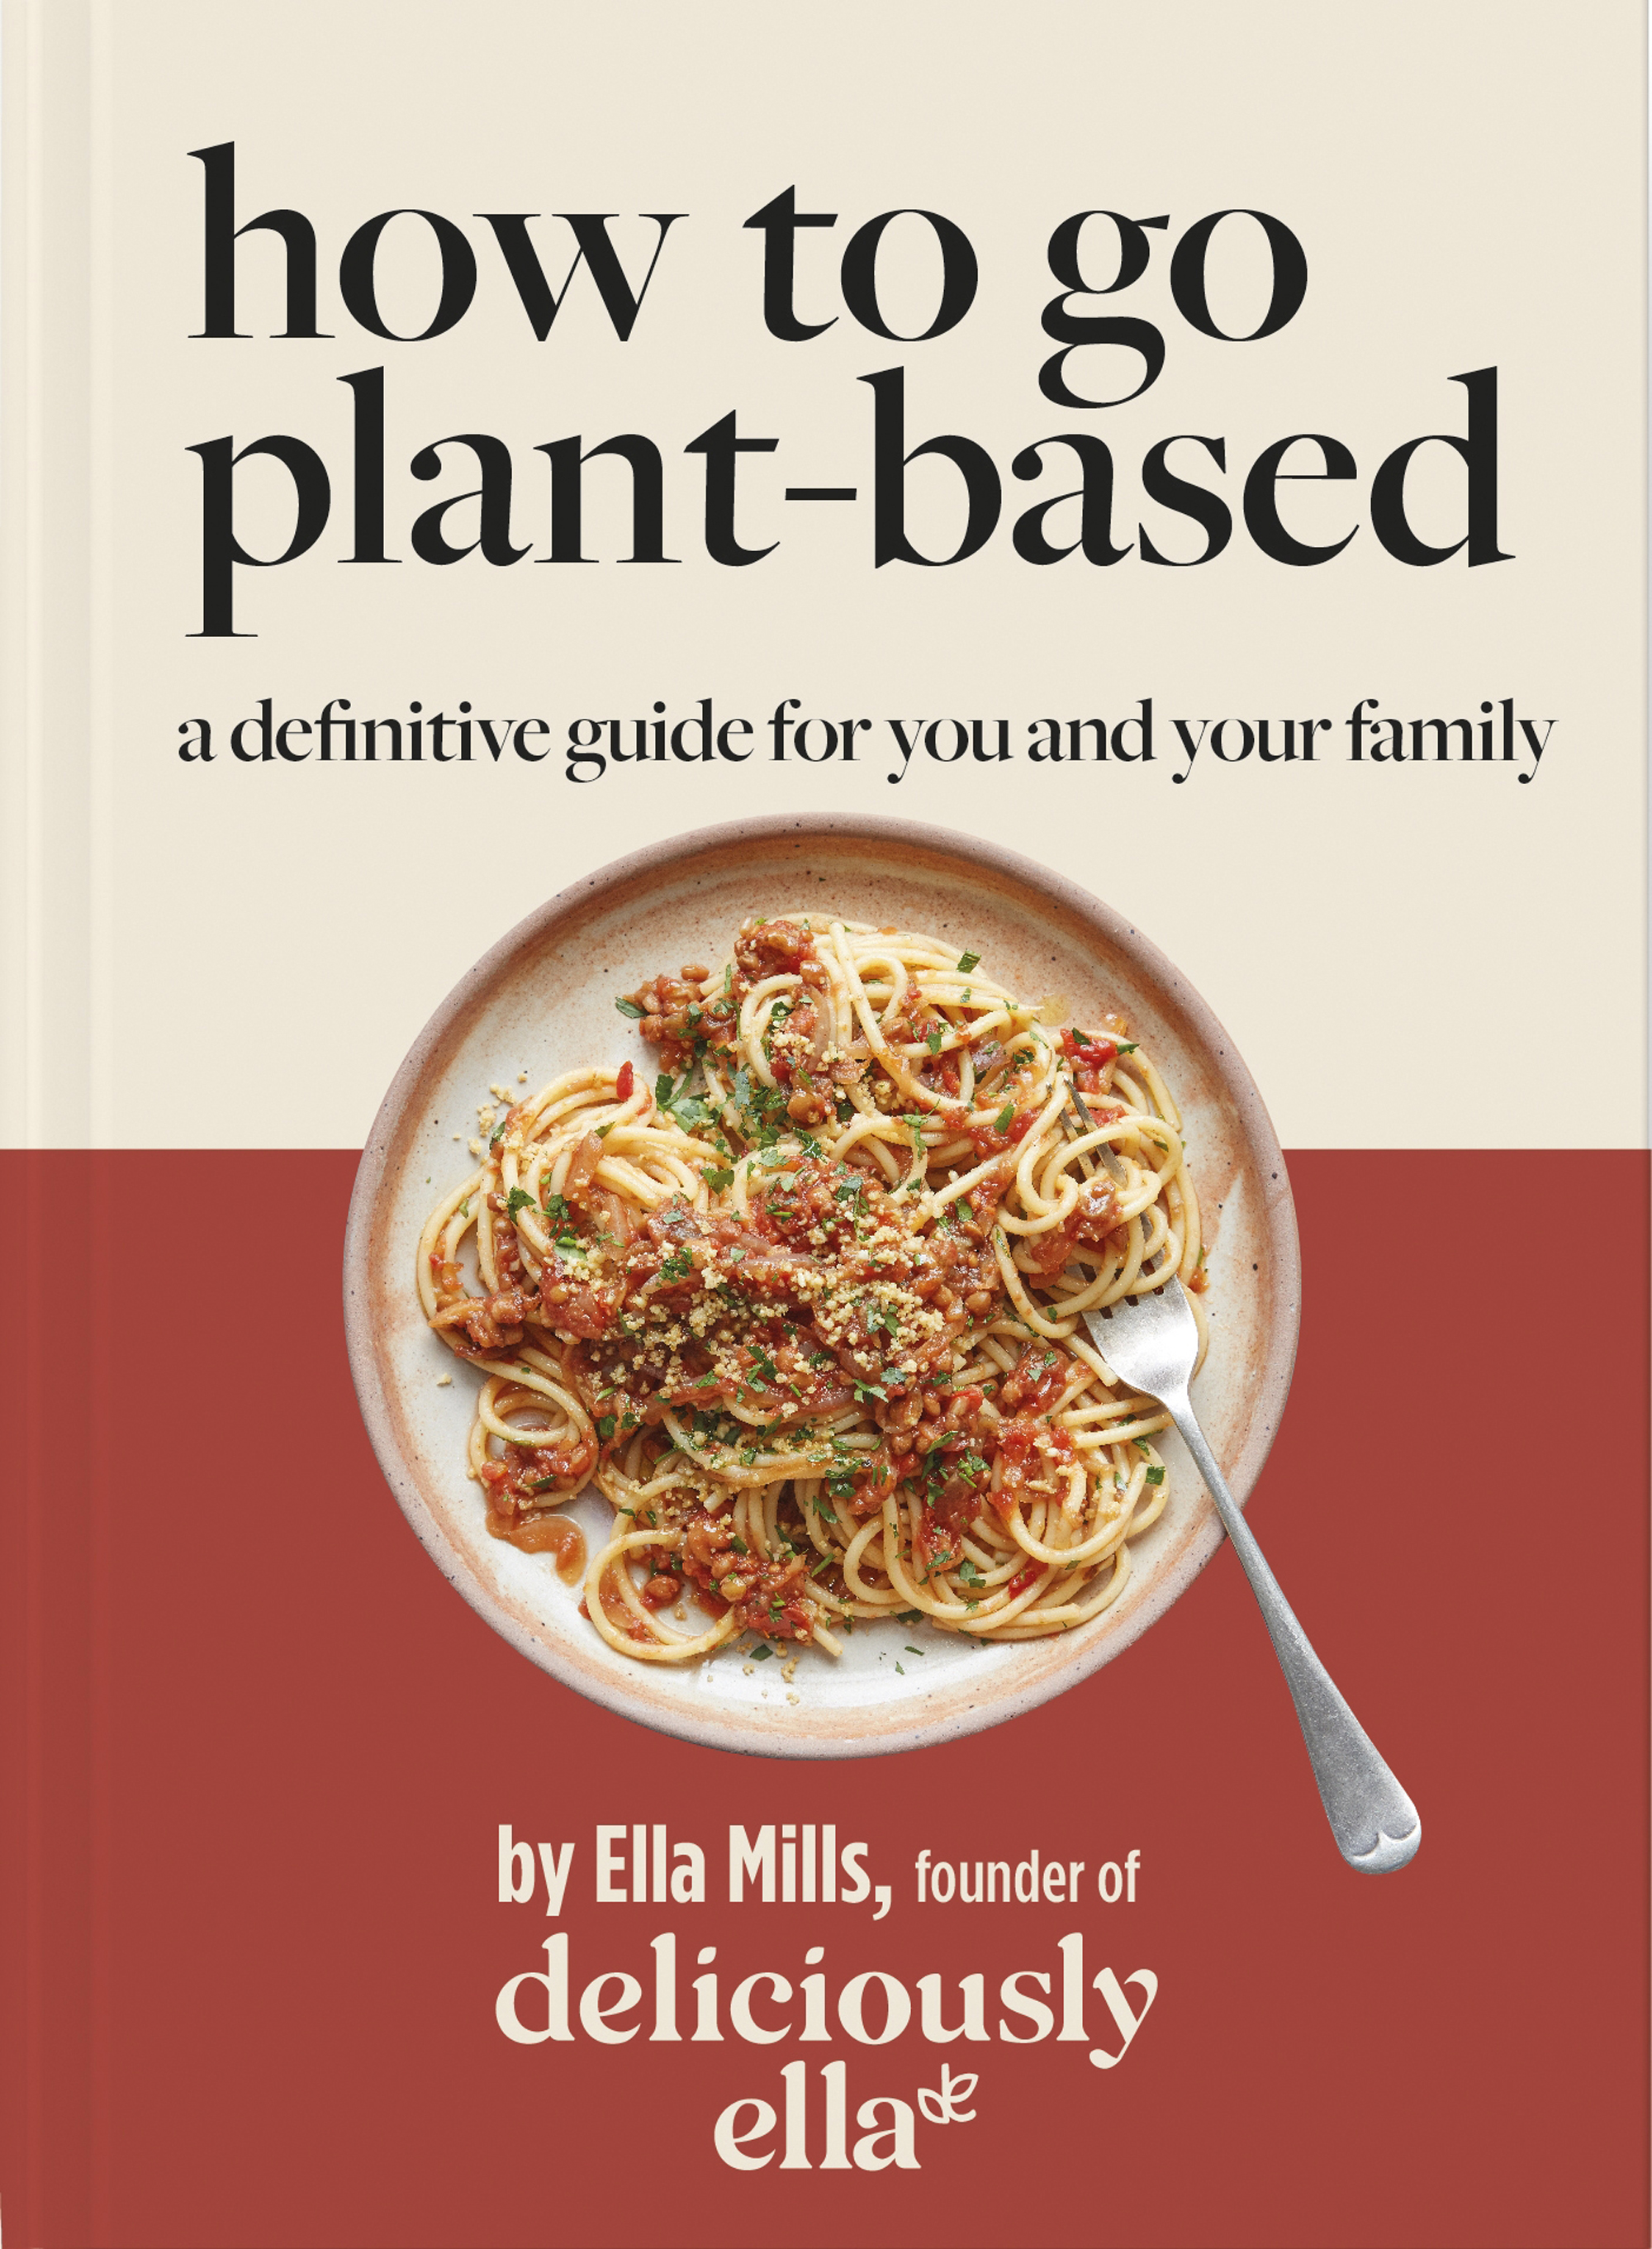 How To Go Plant-Based: A Definitive Guide for You and Your Family by Ella Mills